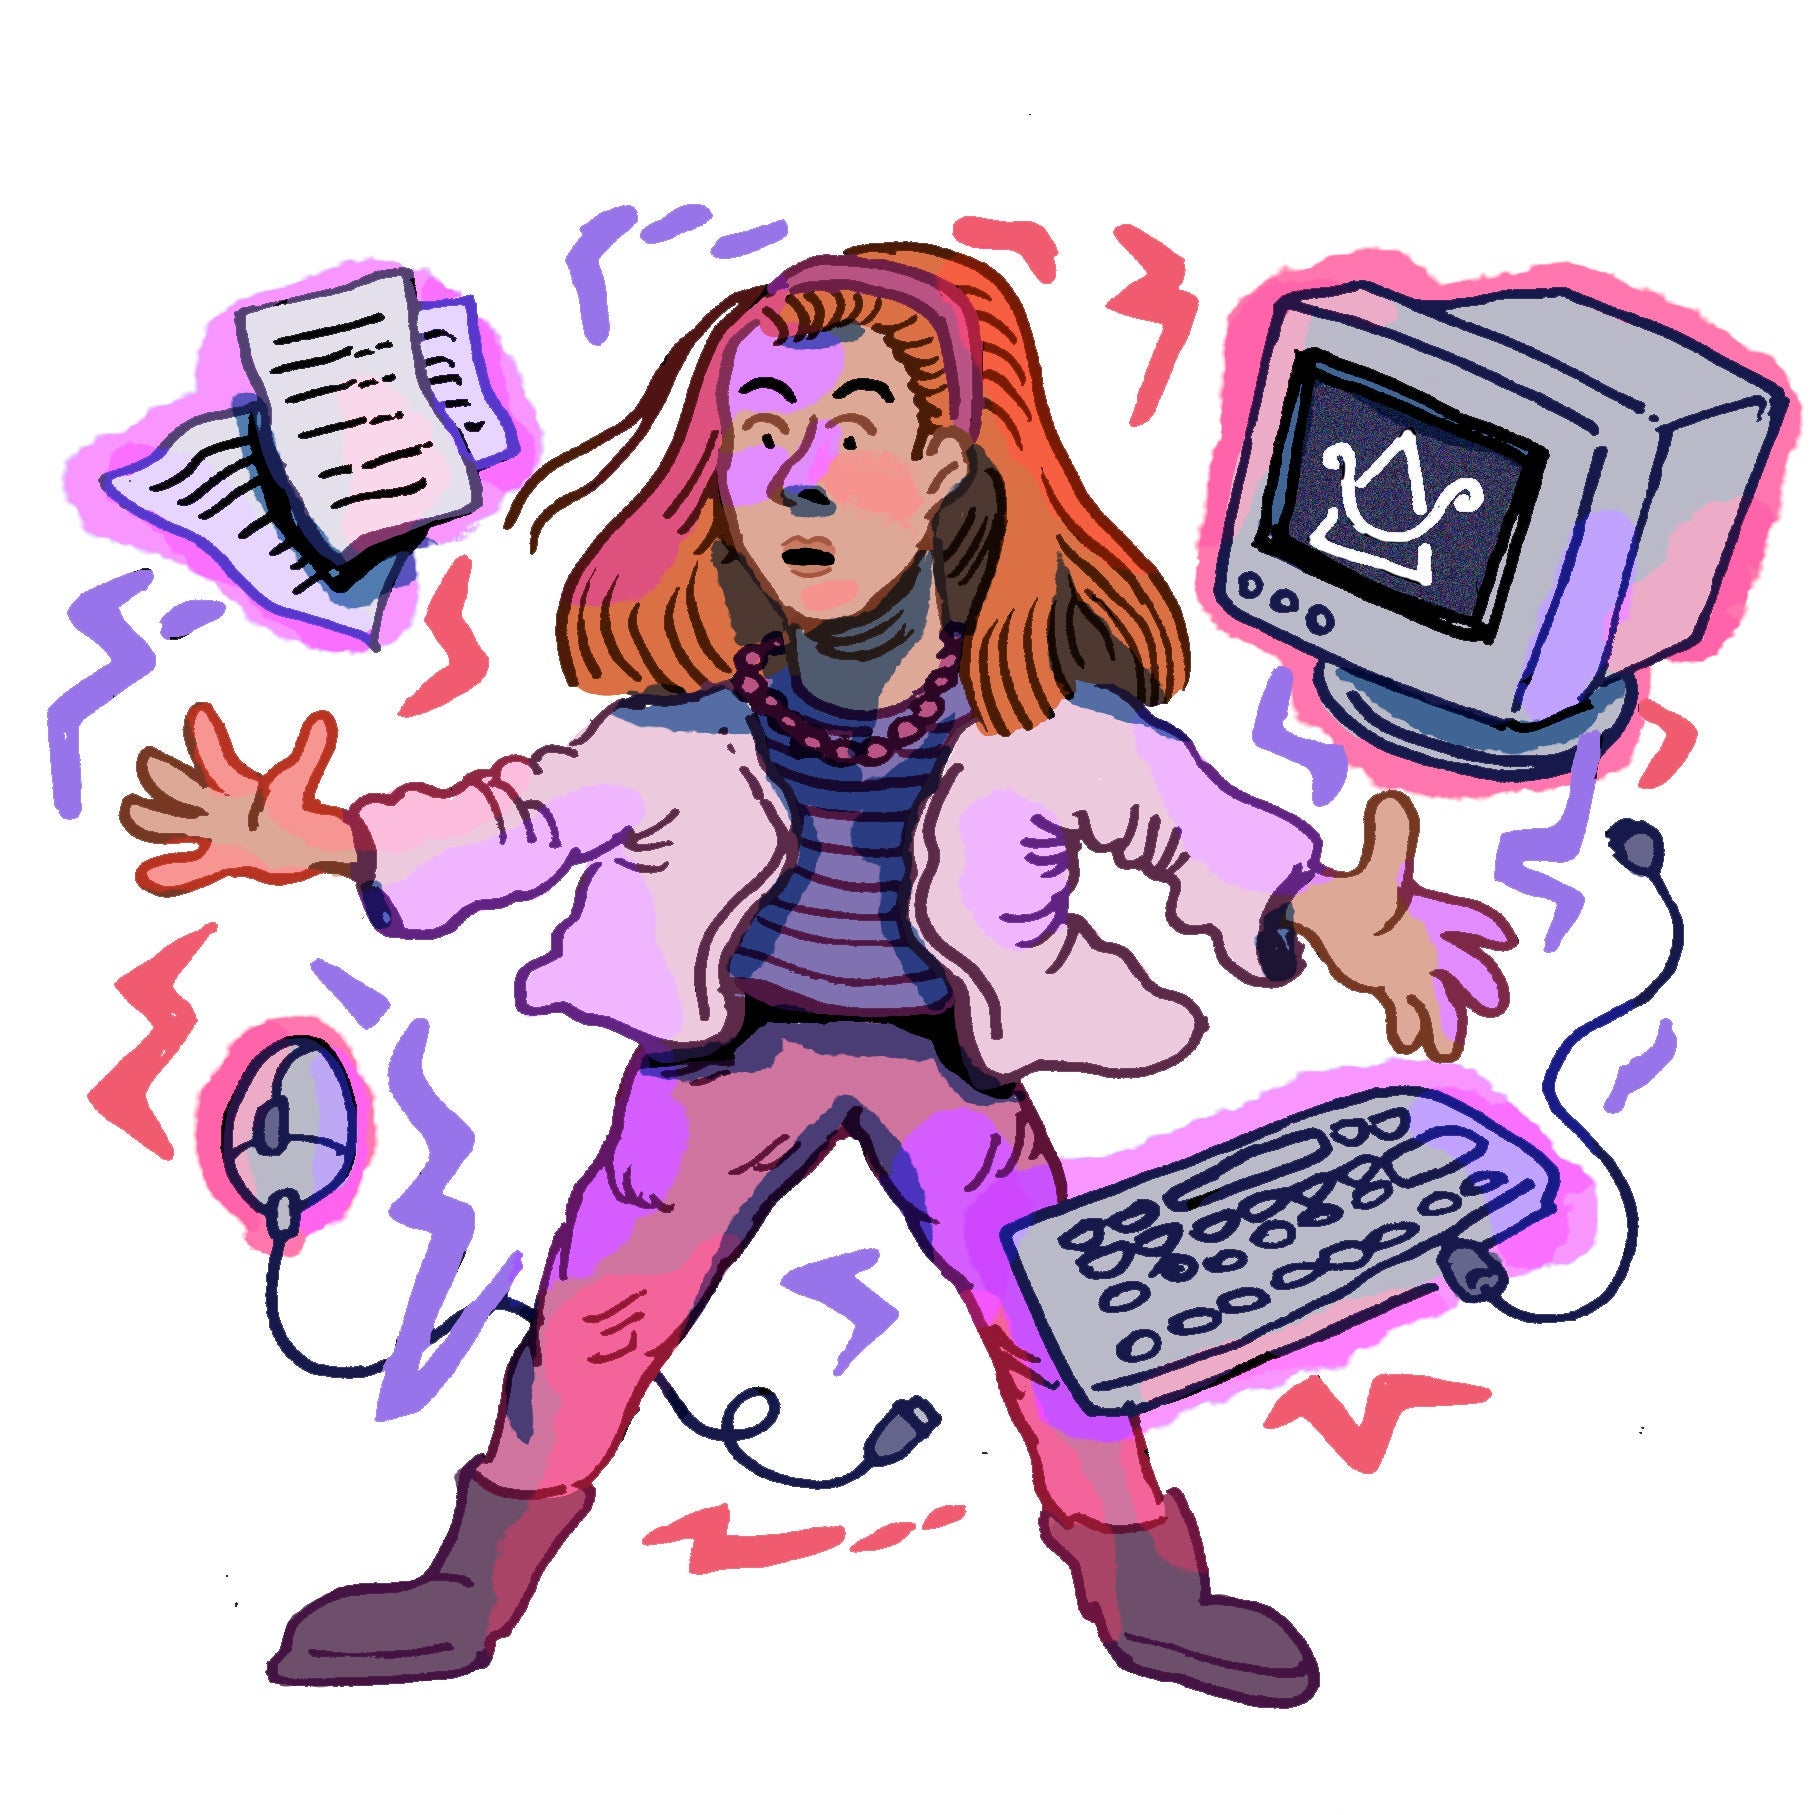 Illustration of Willow surrounded by computer accessories.